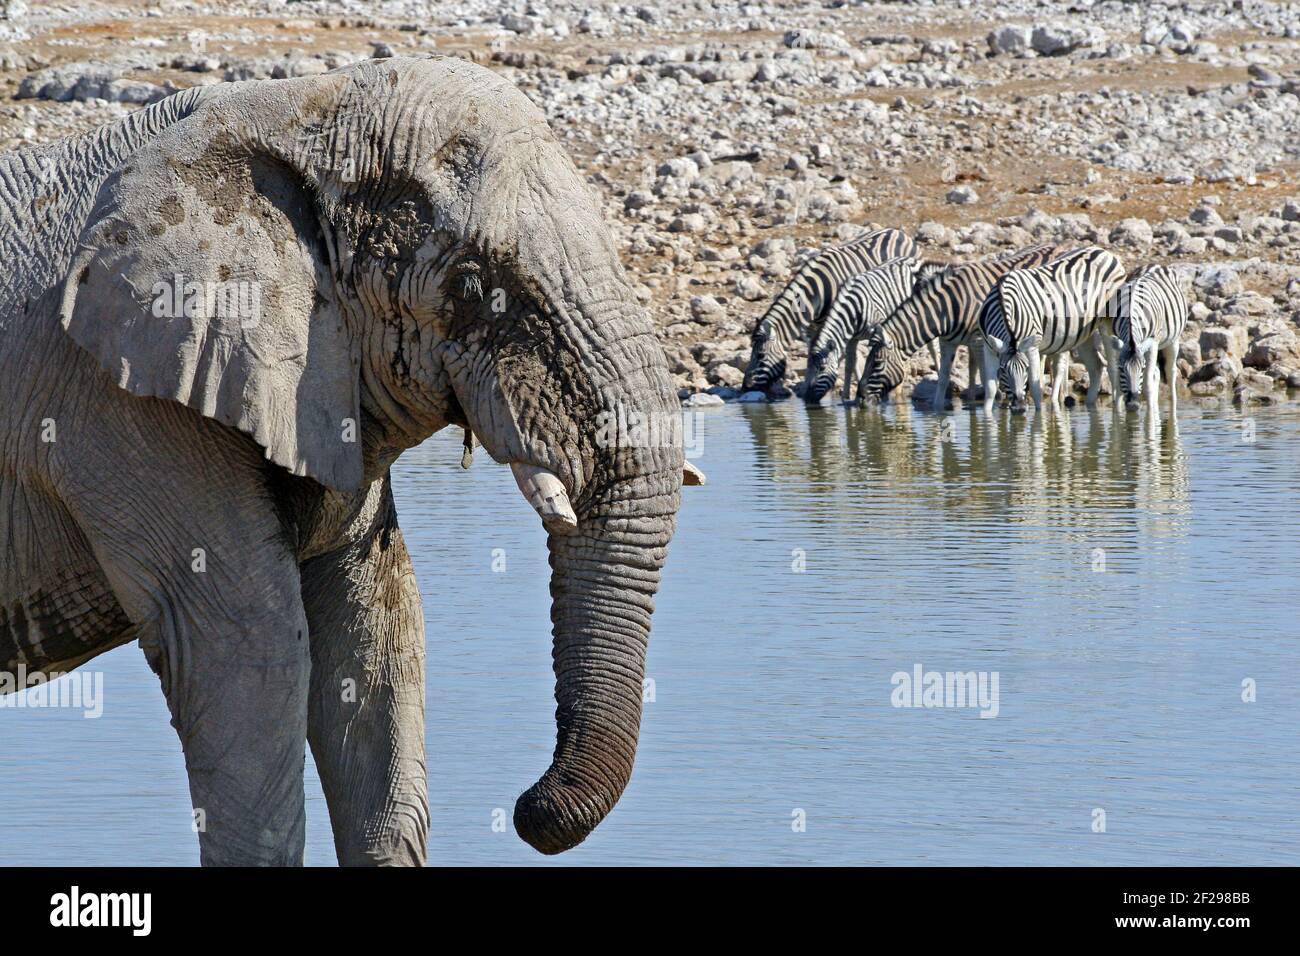 Elephant in foreground while Zebras line up in background to drink at a waterhole in Etosha NP, Namibia Stock Photo